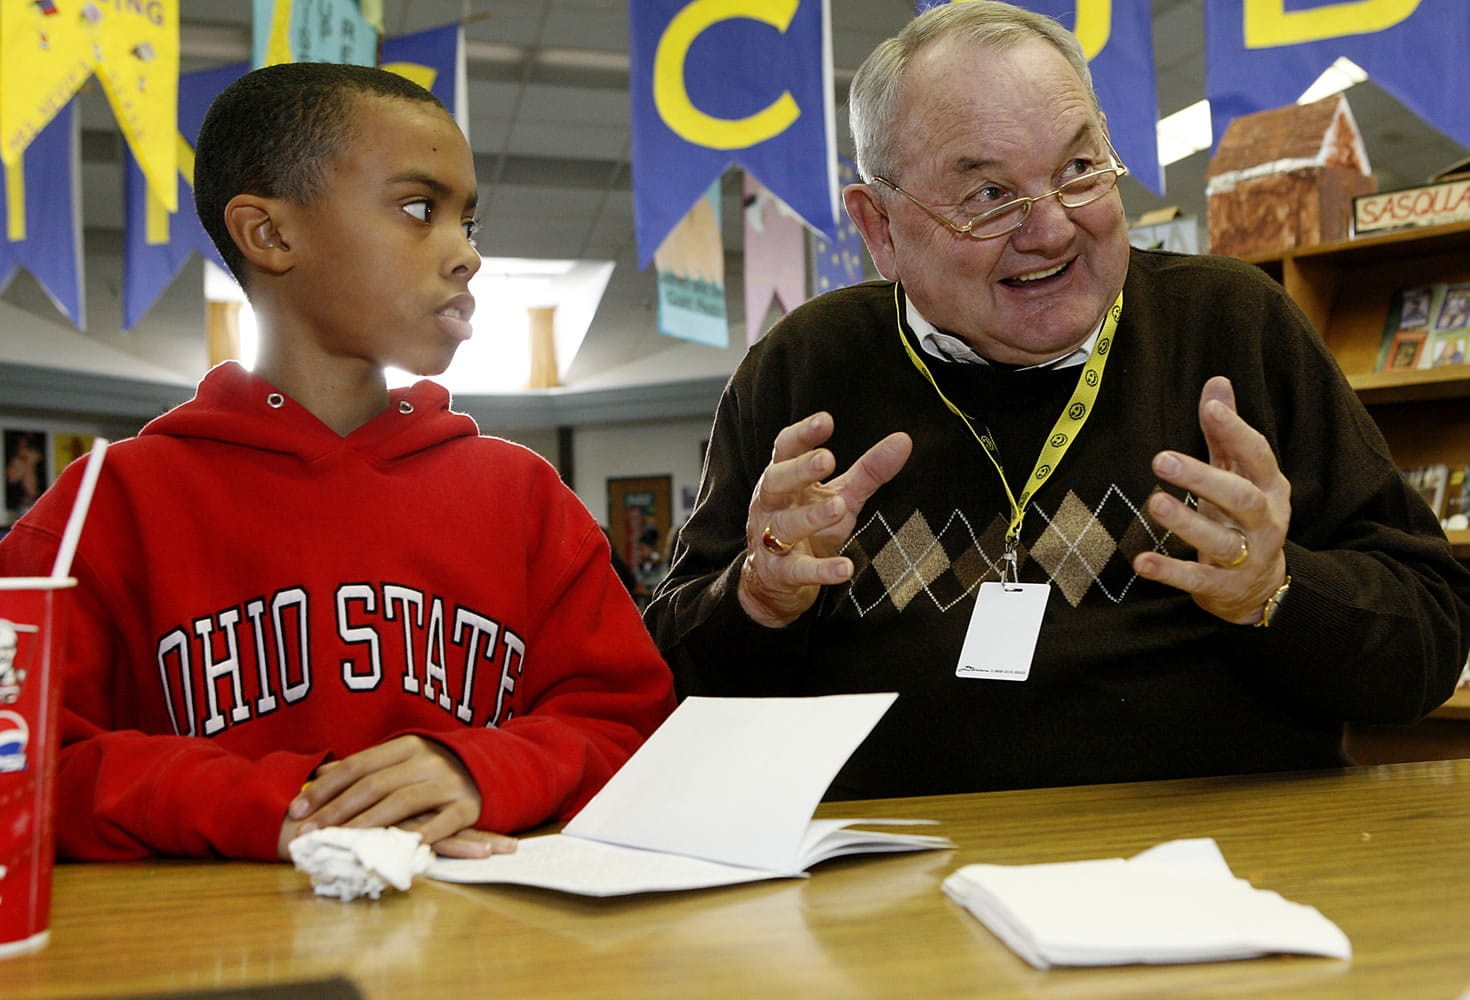 Isaiah Ephraim, then a fifth-grader at Martin Luther King Elementary School in Vancouver, listens as Steve Runyan, a volunteer Lunch Buddy, talks about Patrick McManus' story &quot;Blood Sausage&quot; in February 2008. The two had been lunch buddies since Isaiah was in third grade.